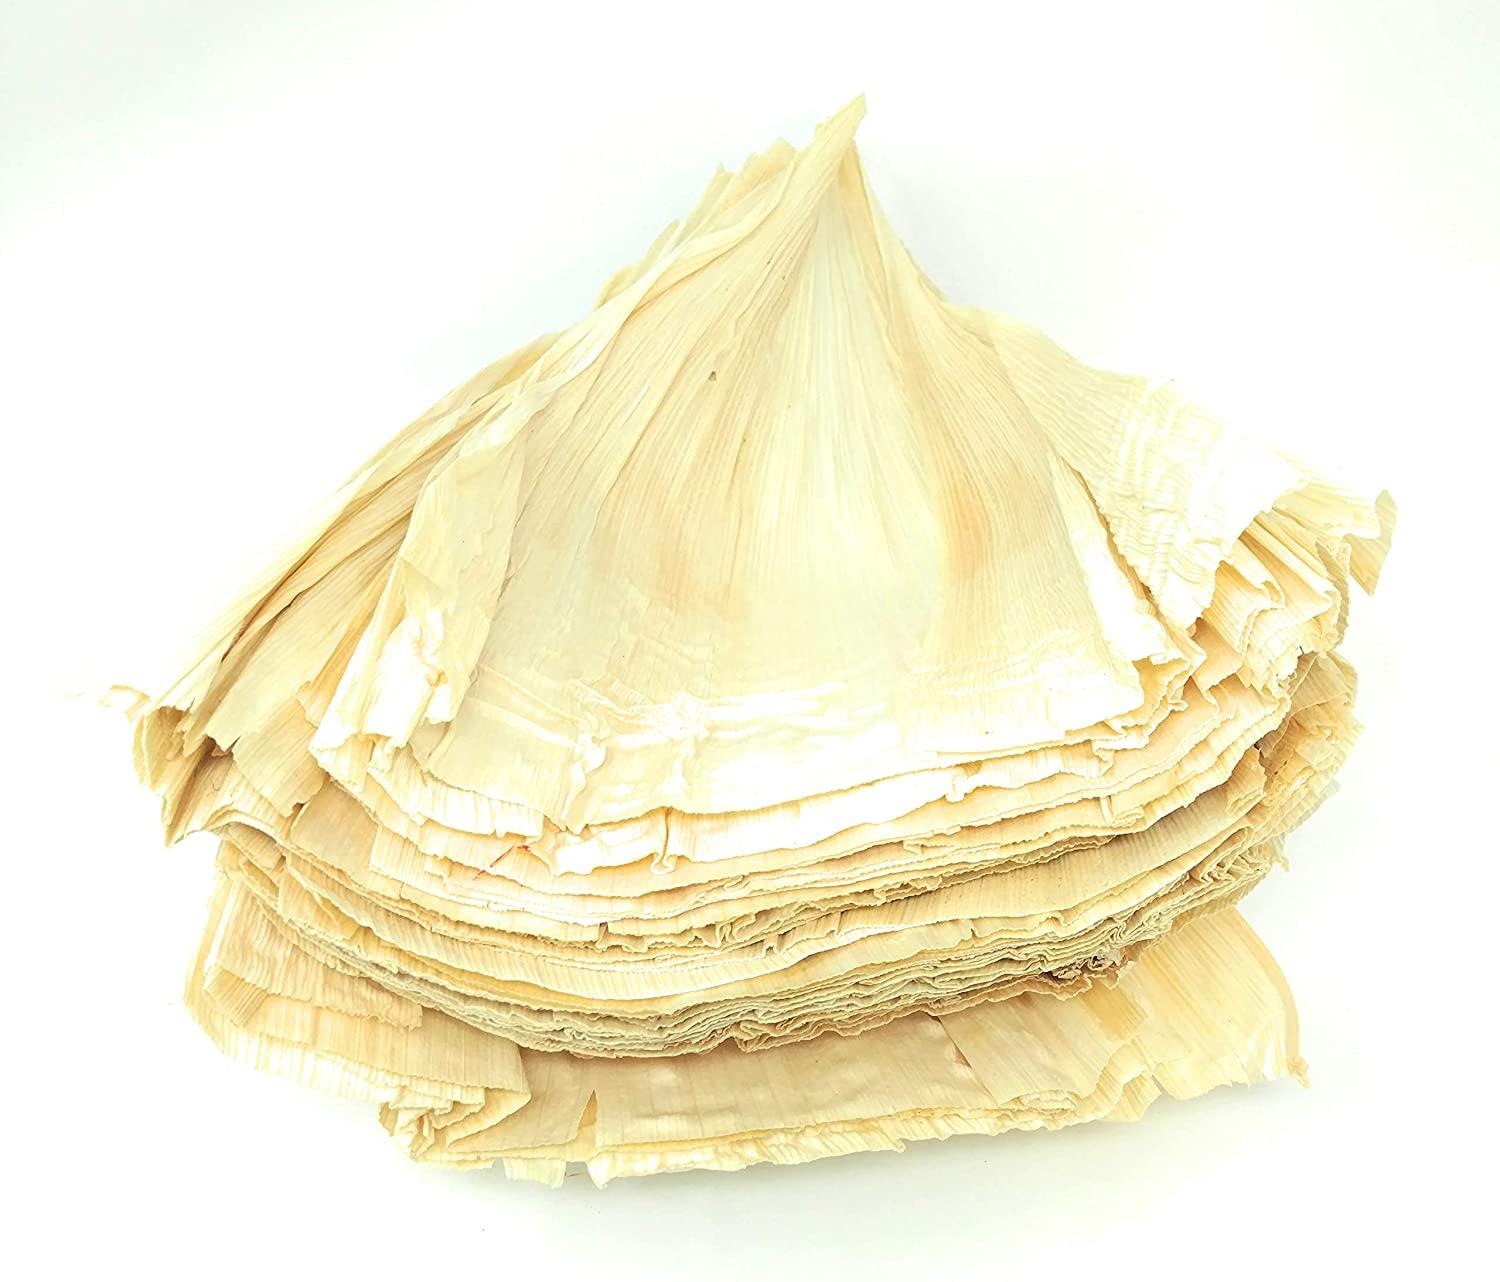 Corn Husks For Tamales 1 LB (16oz) Natural and Premium Dried Corn Husk  Tamale Wrappers Hojas Para Tamal. By Amazing Chiles and Spices.